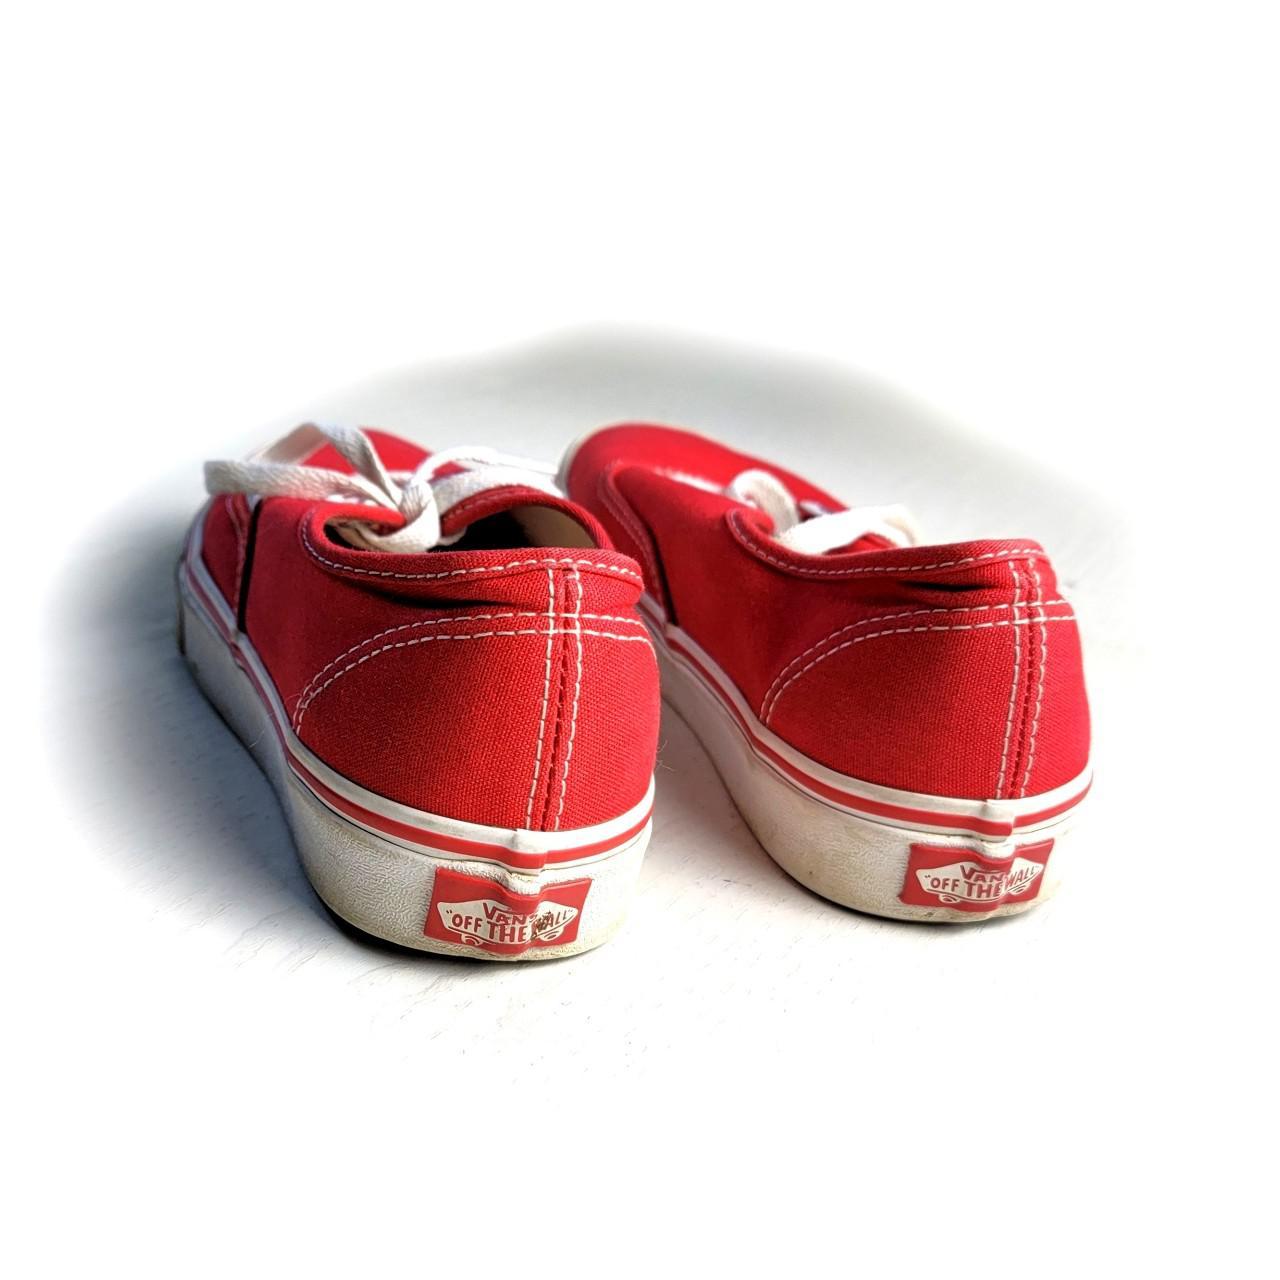 Vans Women's White and Red Trainers (2)